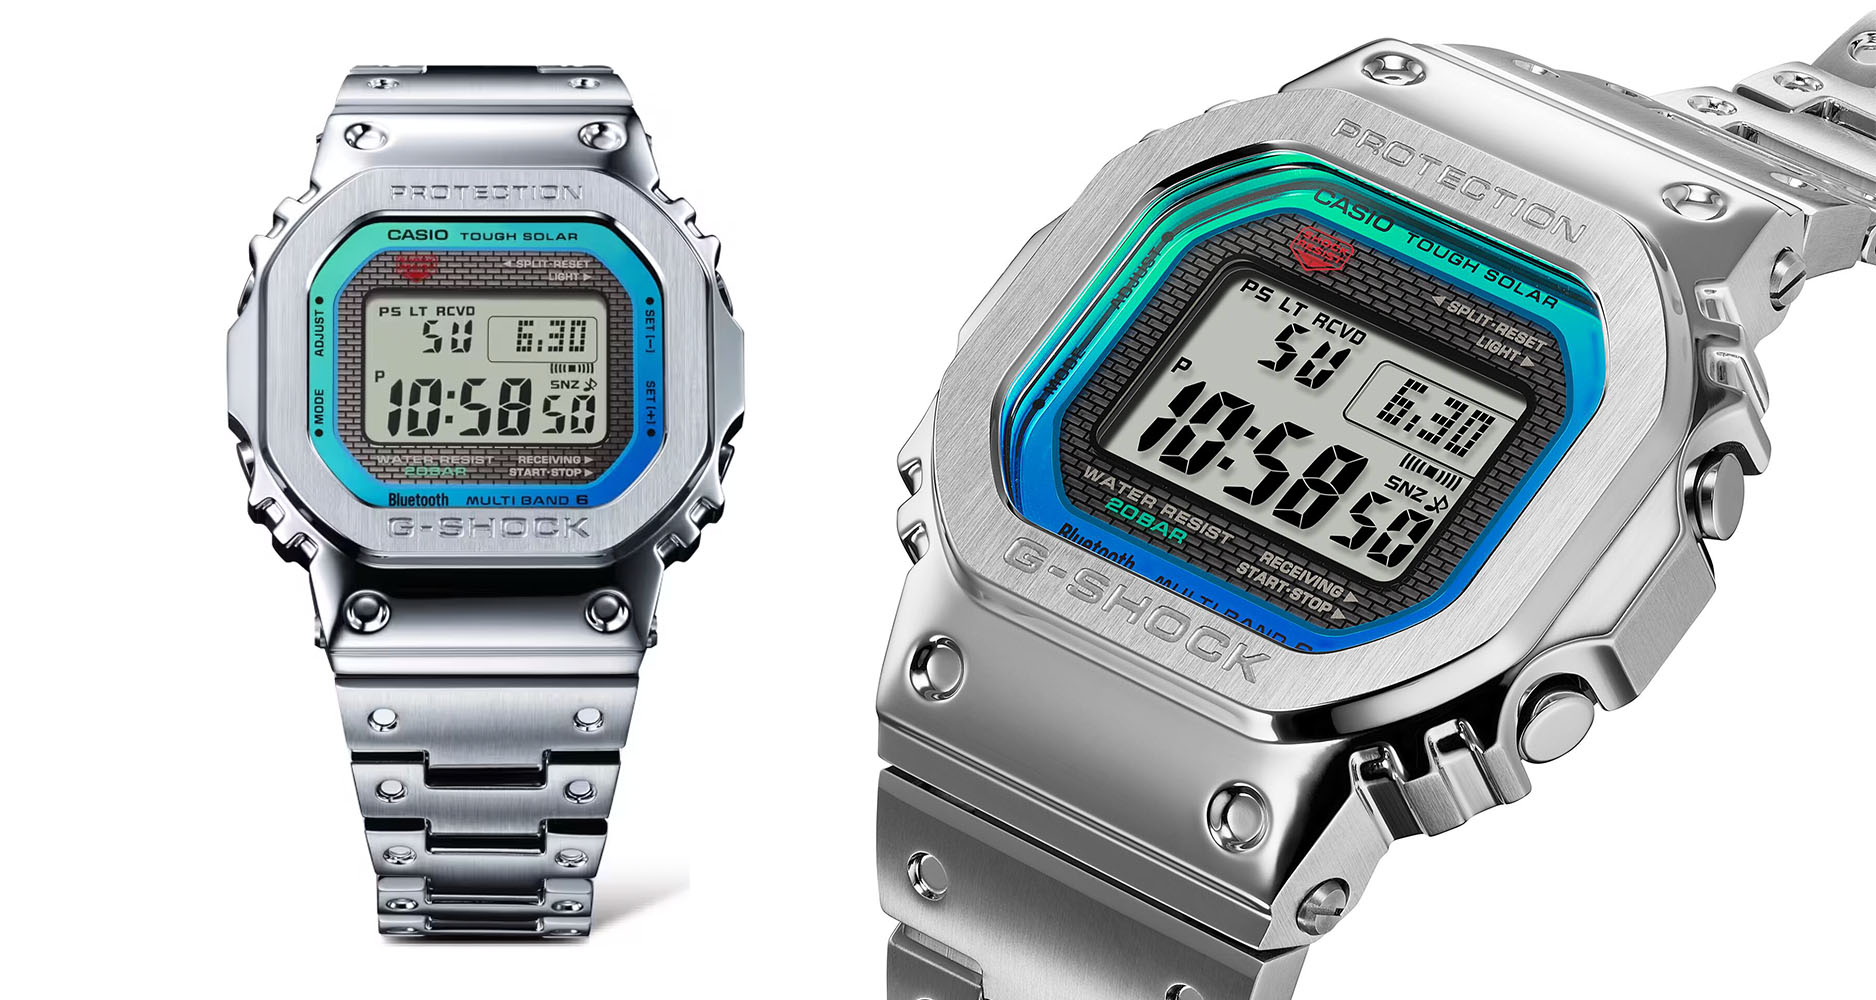 The Casio G-Shock Full Metal GMW-B5000PC in steel case with gradient blue dial.